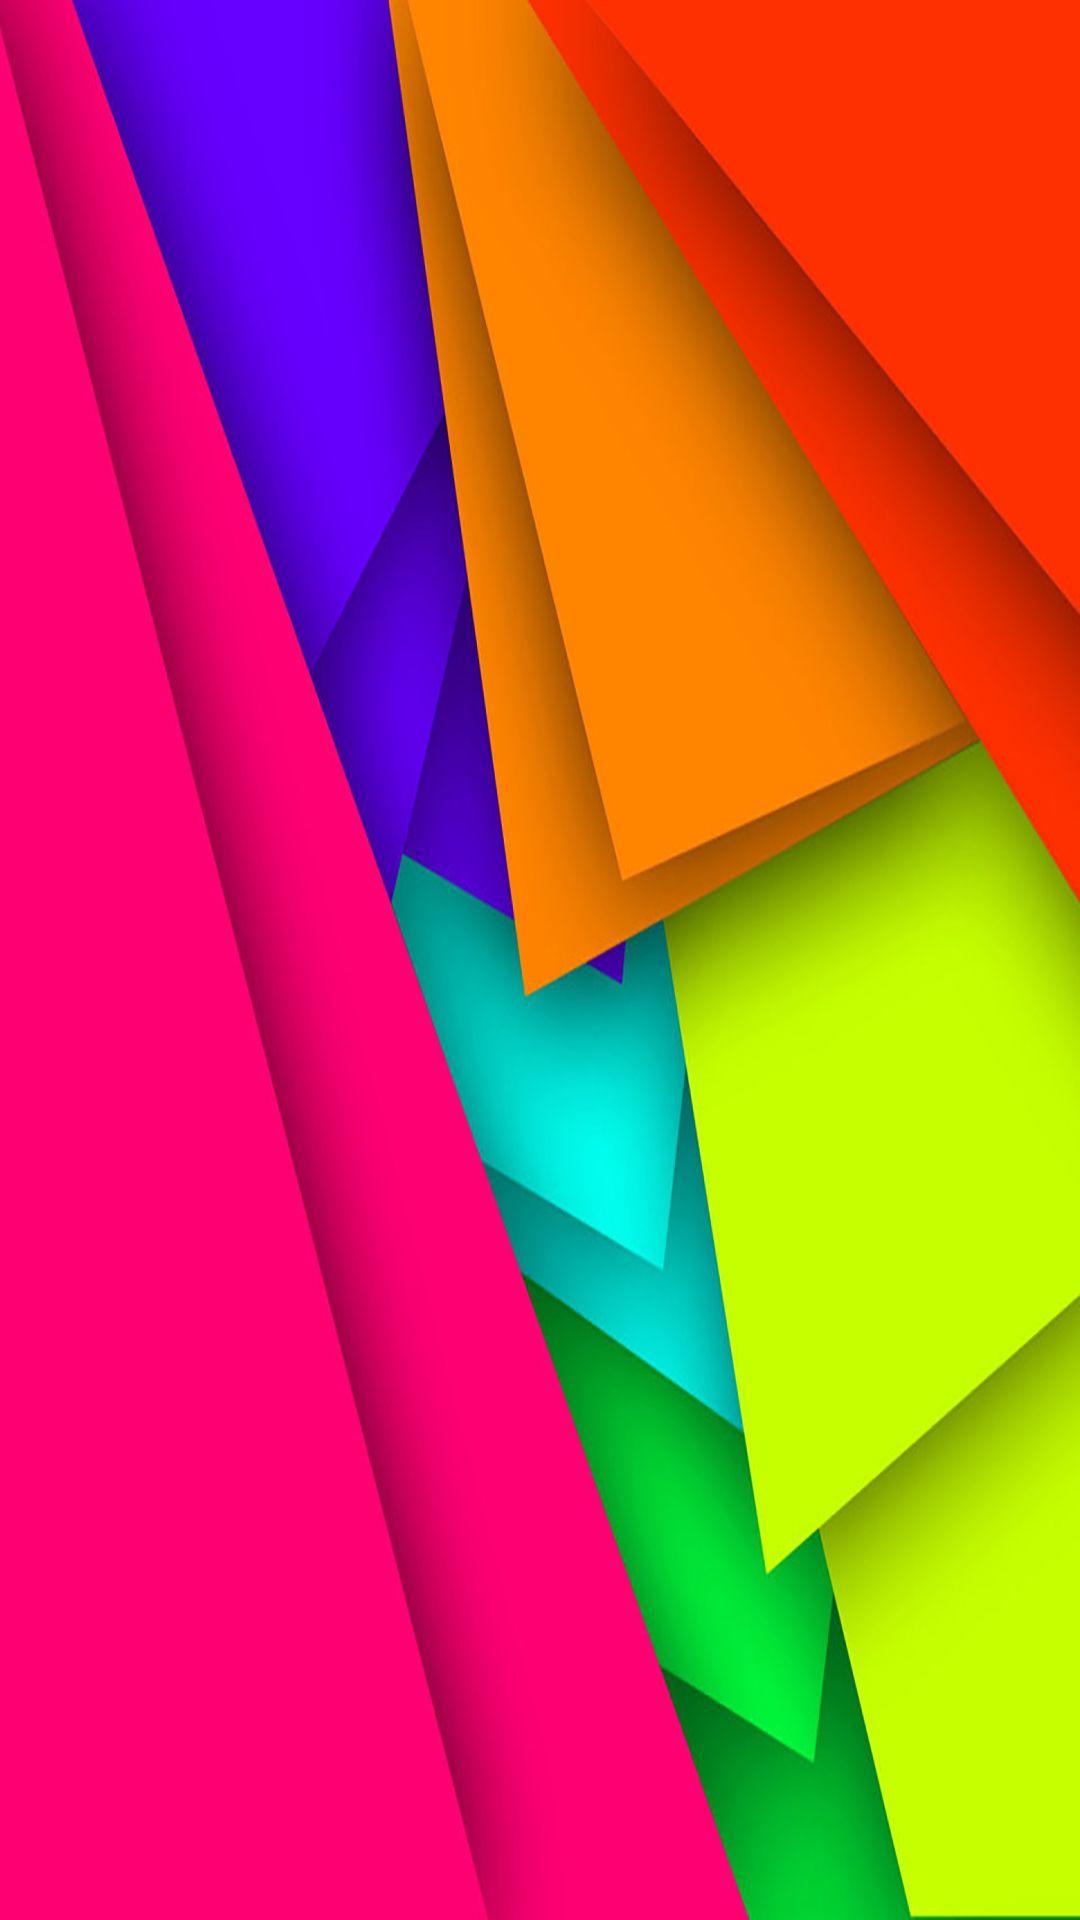 Bold Colorful Abstract Art Wallpaper. *Abstract and Geometric